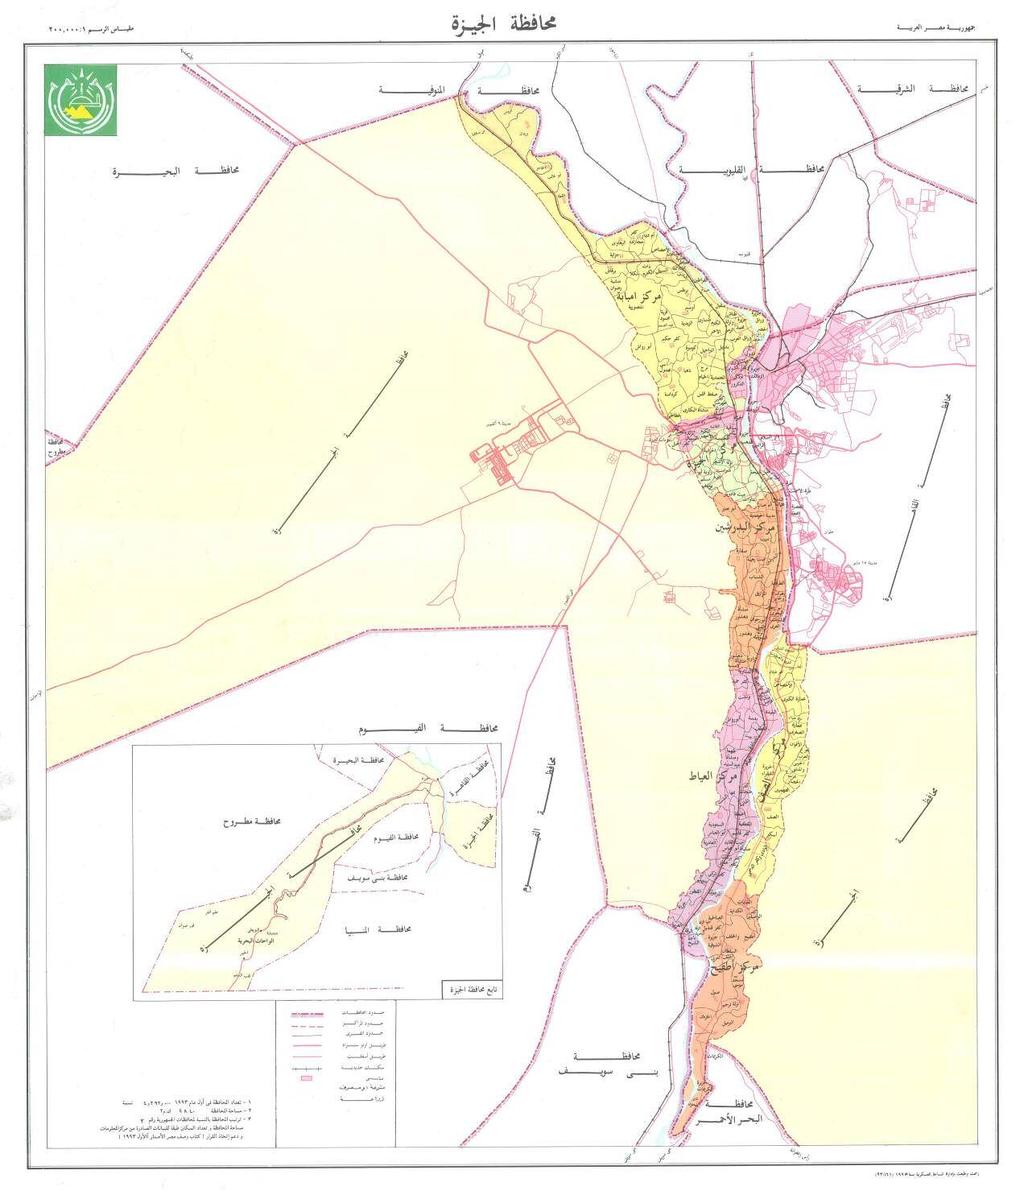 Figure -2 (C) Location Map of the Proposed Site within the Giza Governorate Context (before separation